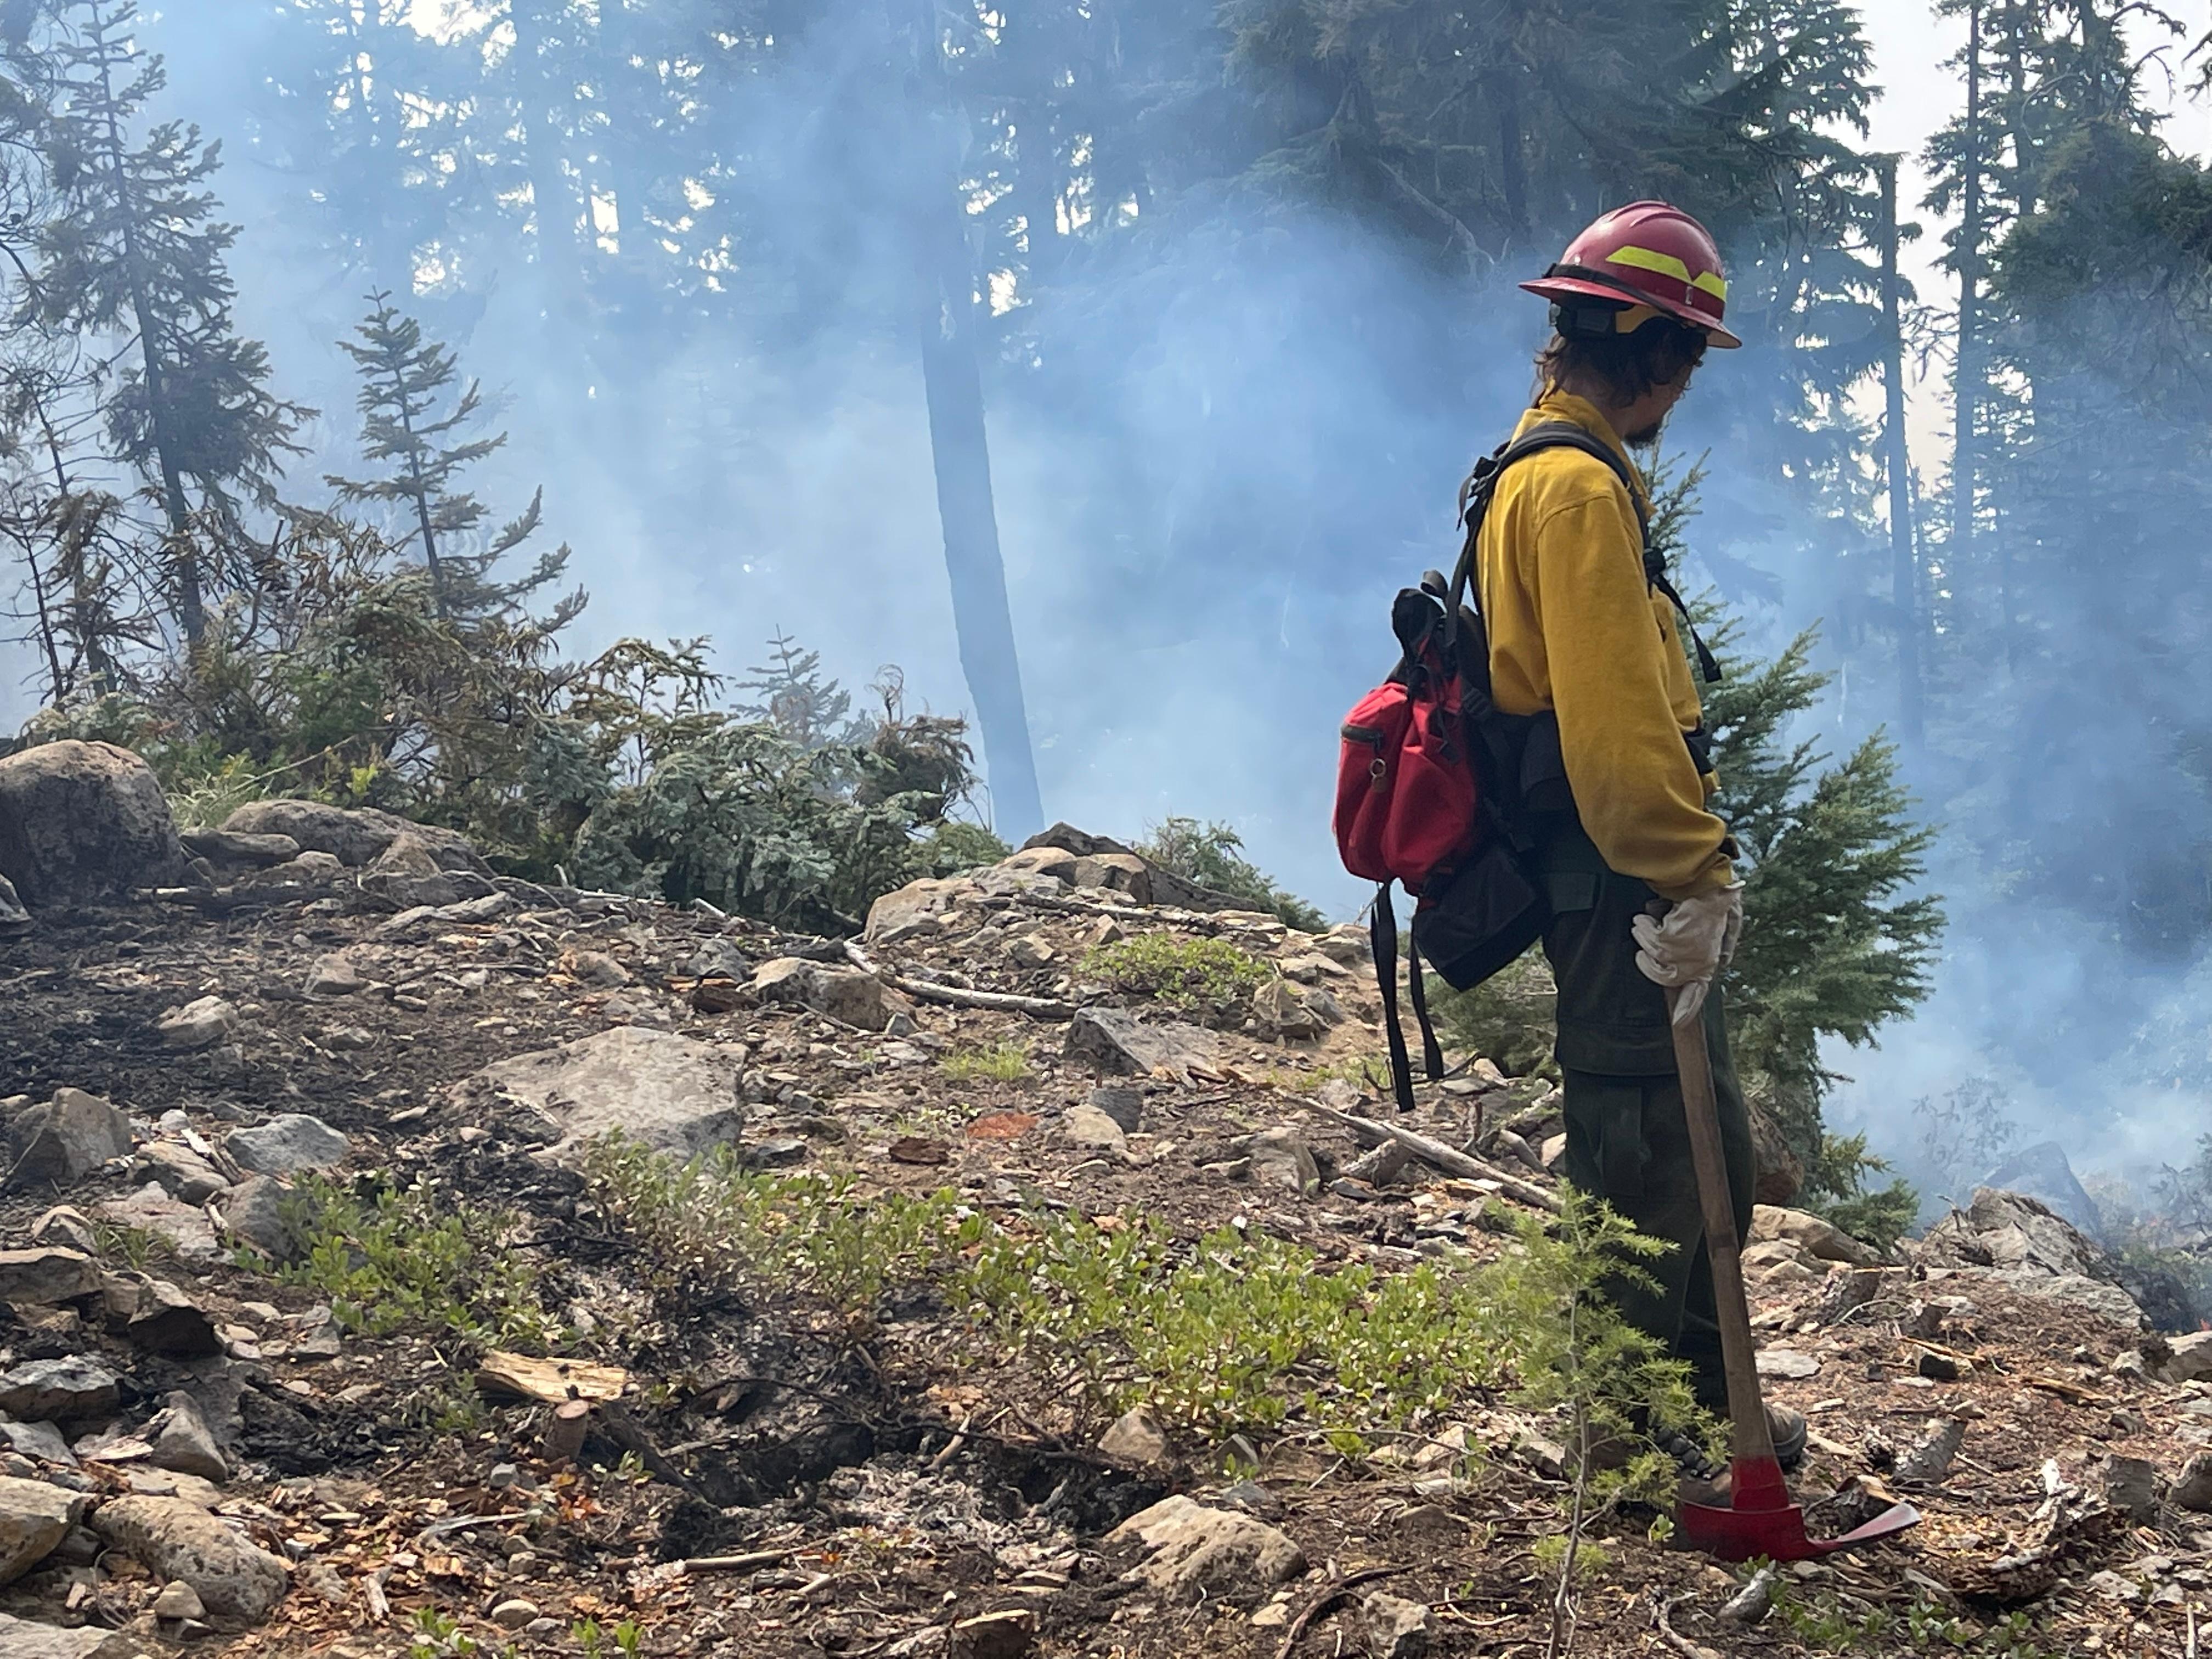 A firefighter wearing wildland firefighting gear looks down on a smoky area in front of him. He is in the forest.